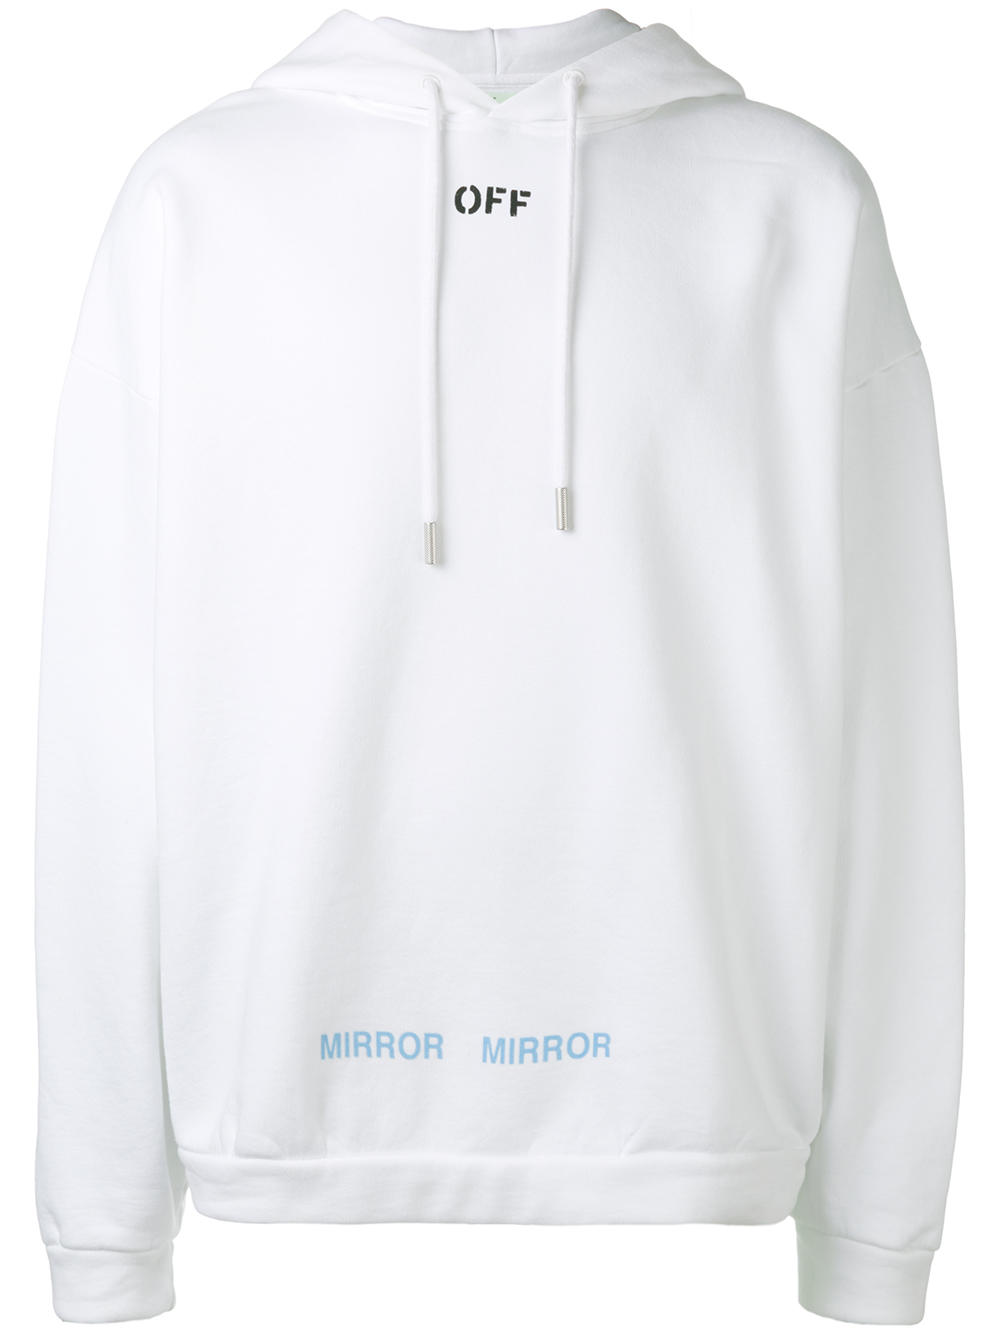 Off-White Care Off hoodie 0110 WHITE BLACK Men Clothing Hoodies